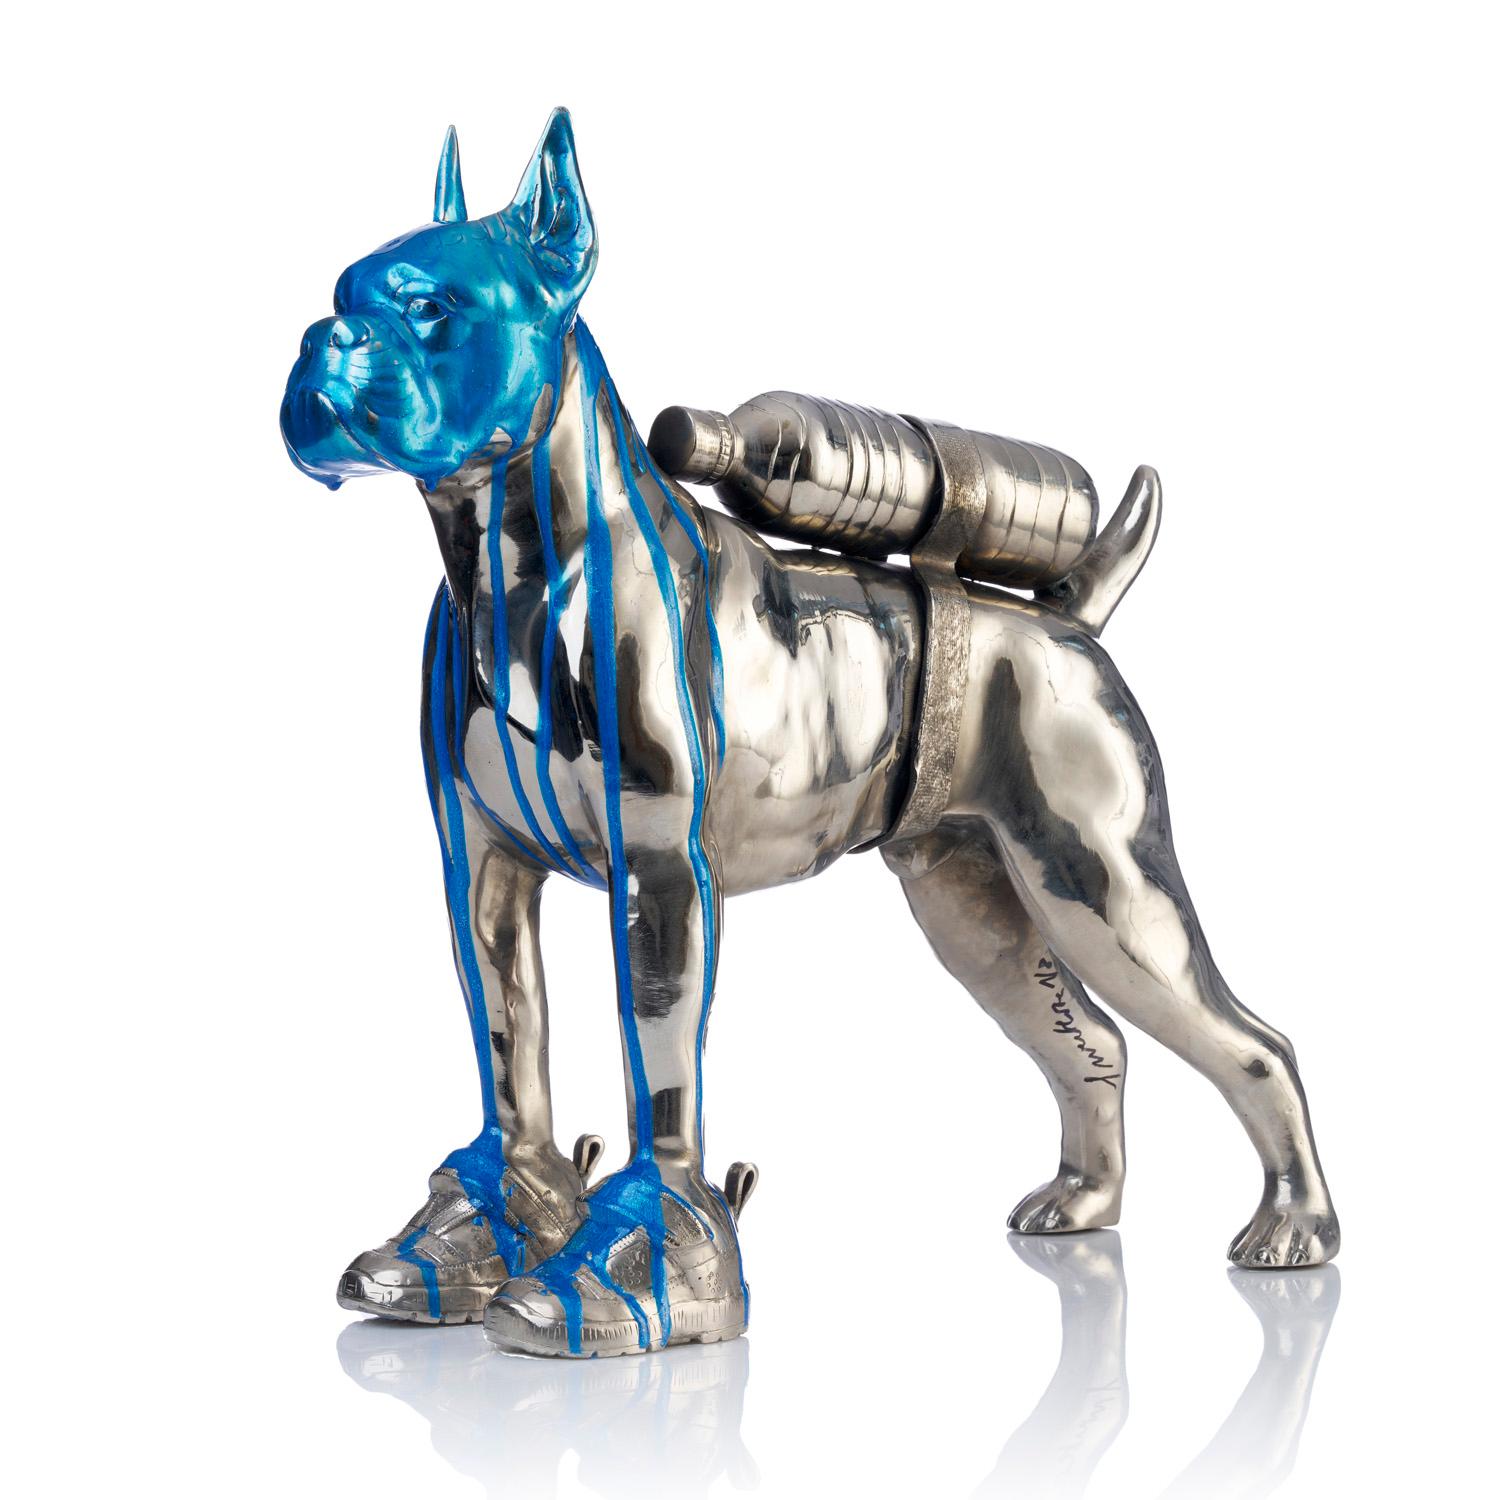 Cloned Bulldog with pet bottle (blue metallic) - Sculpture by William Sweetlove